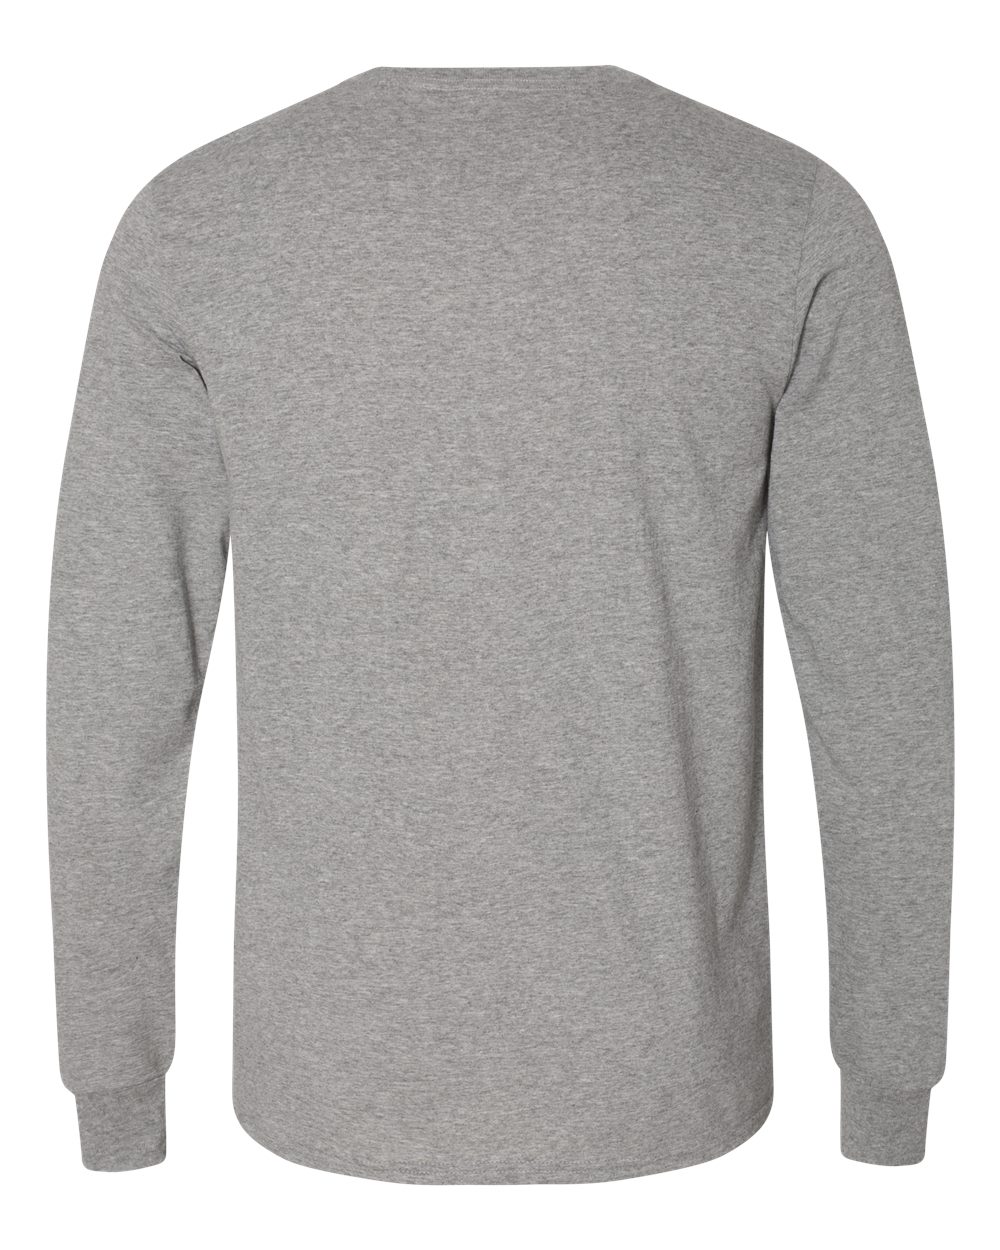 Russell Athletic 64LTTM Oxford Essential 60/40 Performance Long Sleeve ...